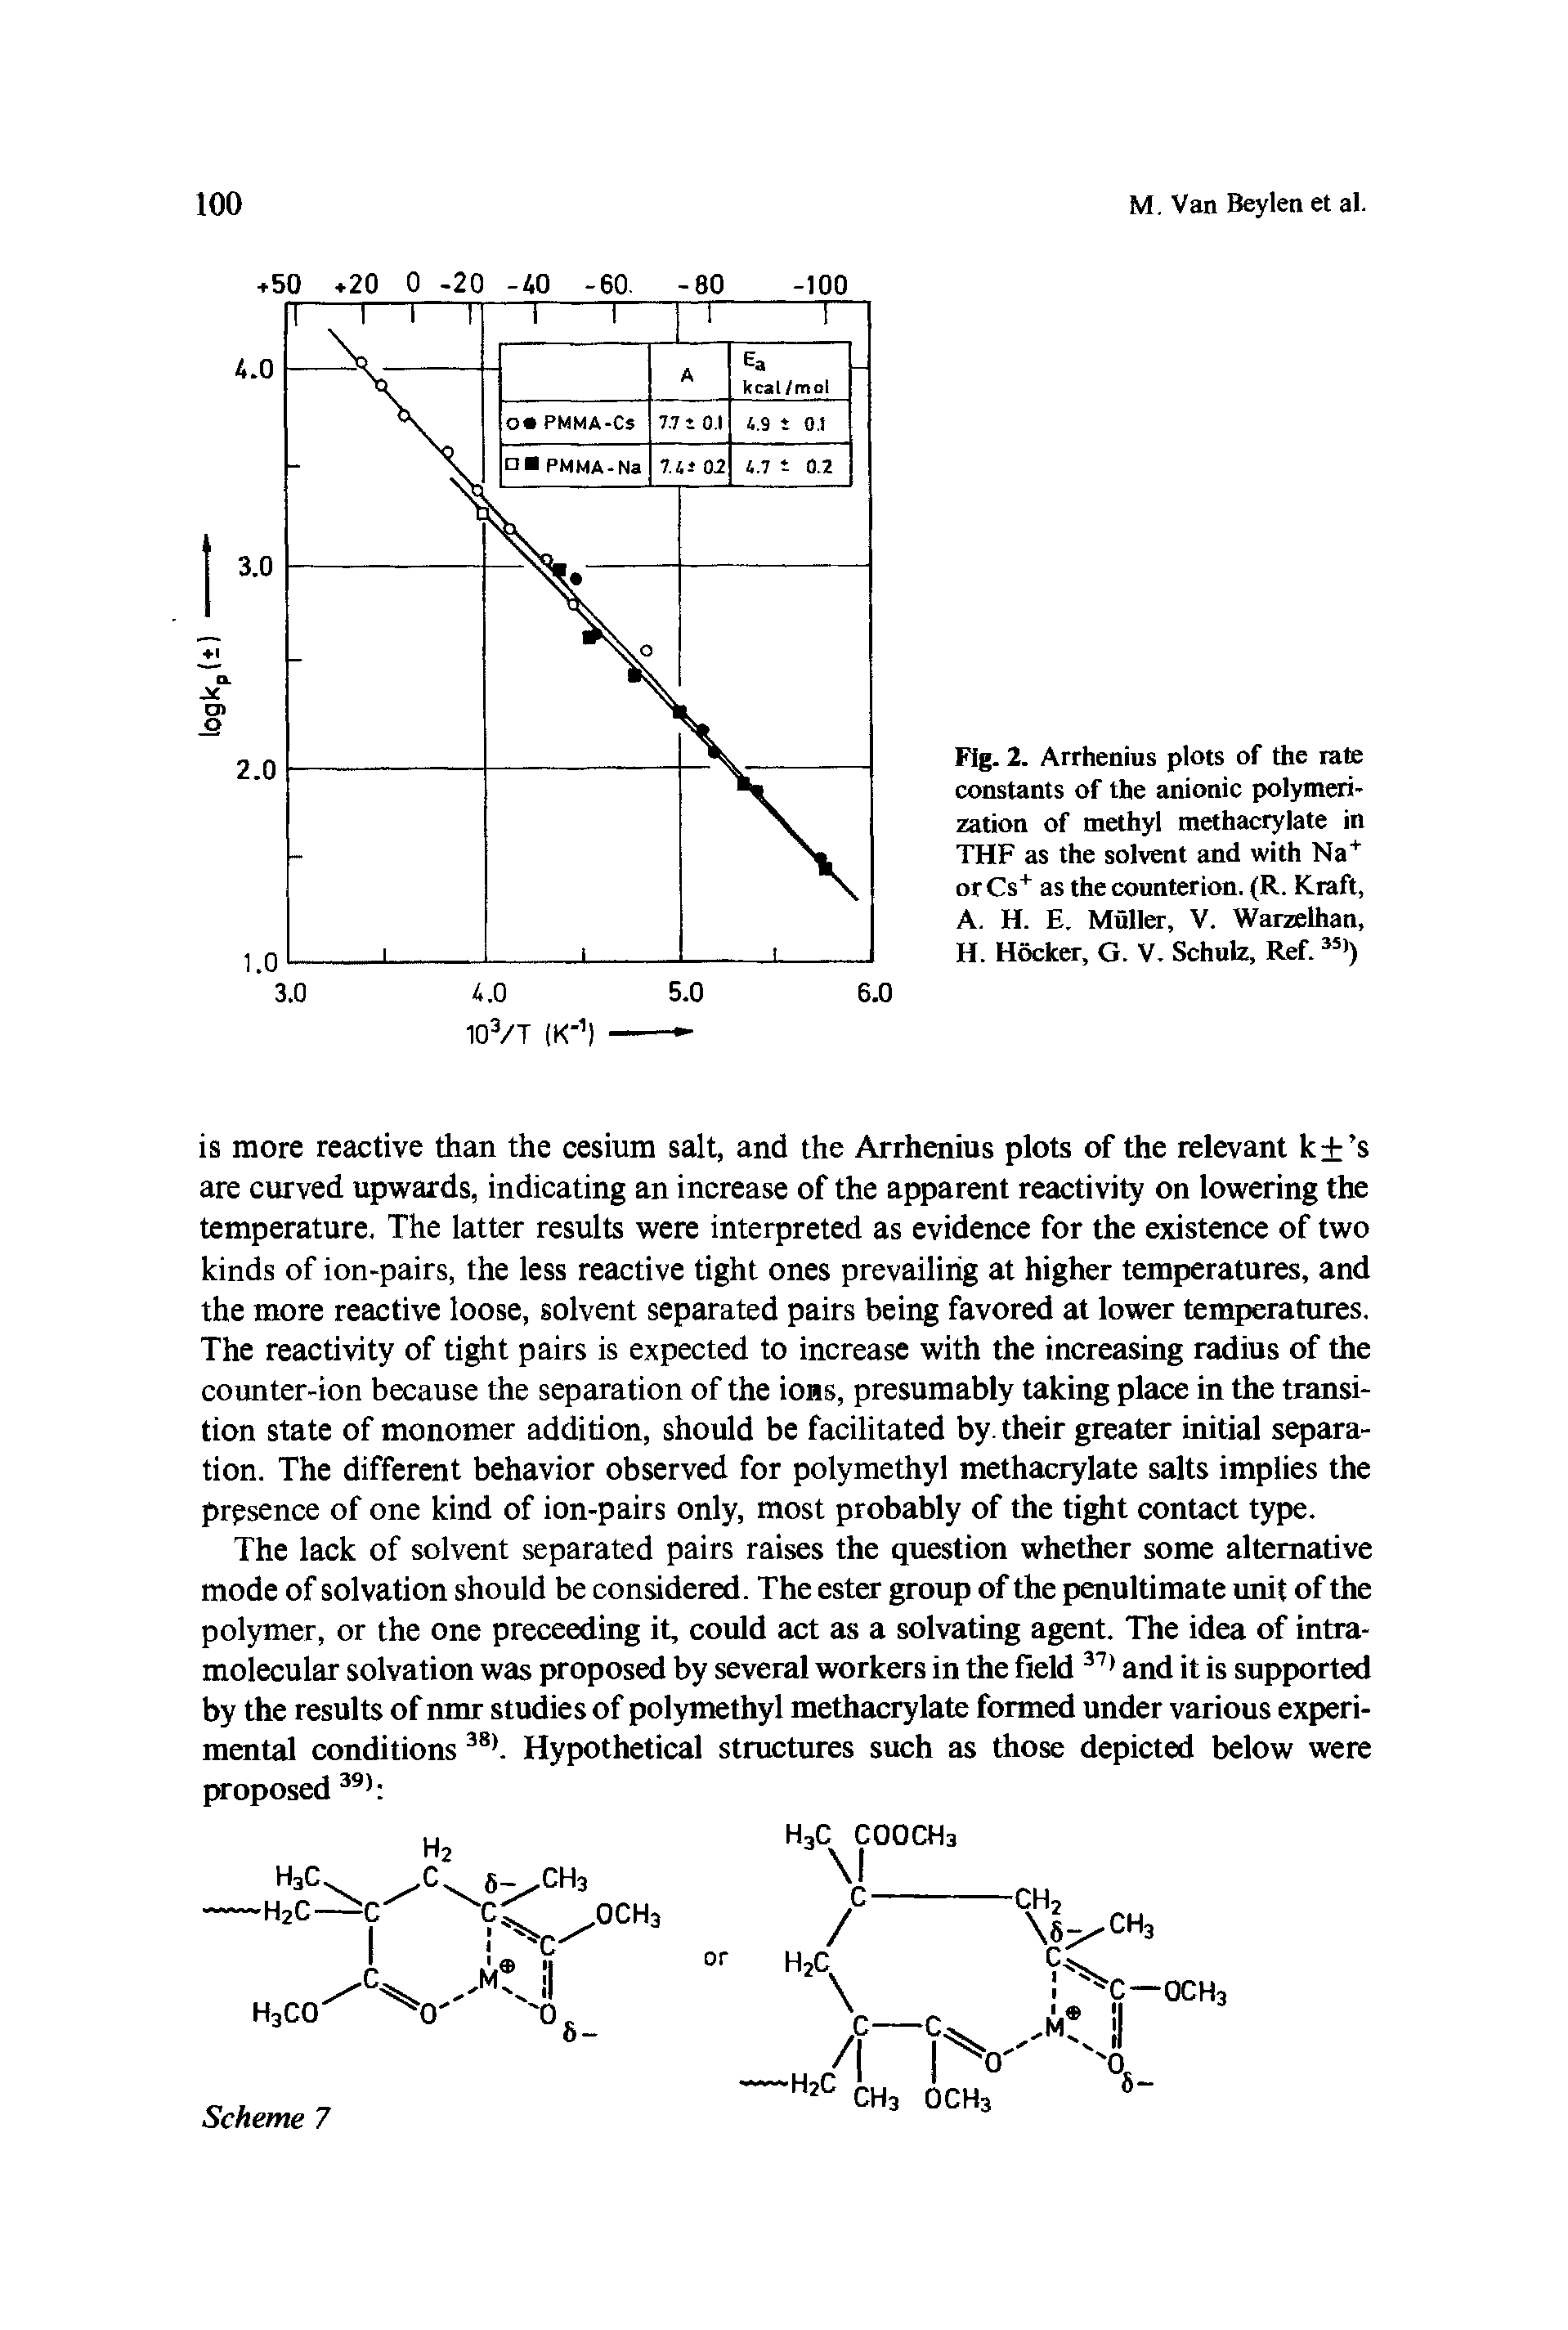 Fig. 2. Arrhenius plots of the rate constants of the anionic polymerization of methyl methacrylate in THF as the solvent and with Na+ orCs+ as the counterion. (R. Kraft, A. H. E. Muller, V. Warzelhan, H. Hocker, G. V. Schulz, Ref.35>)...